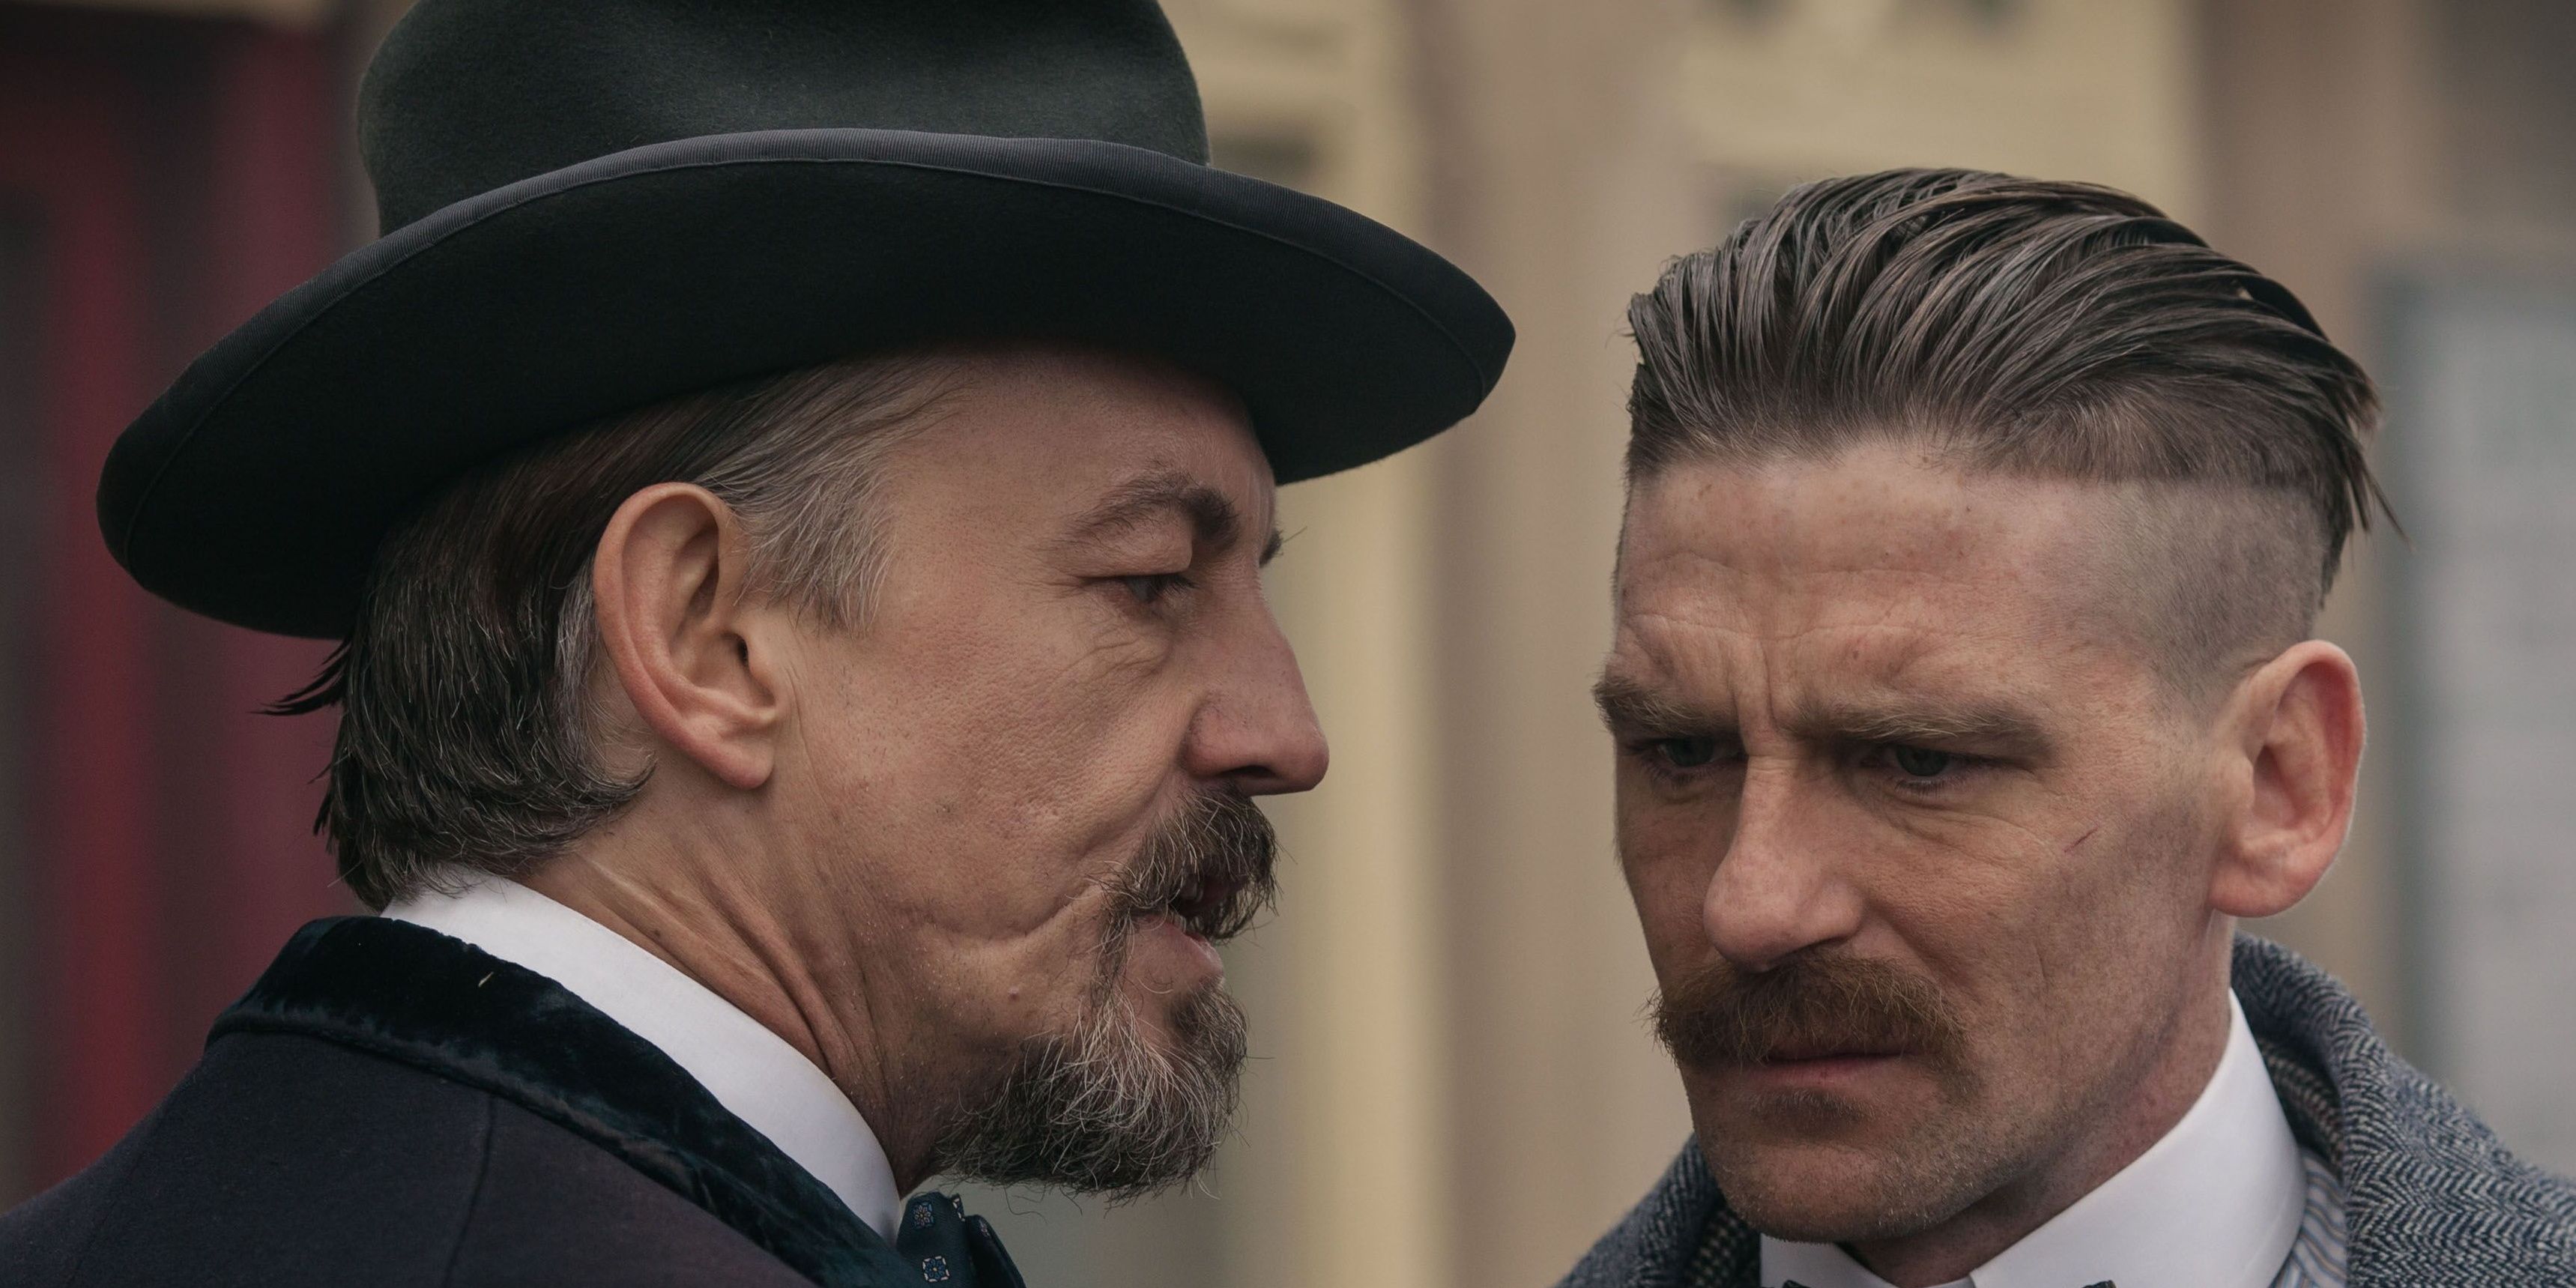 Peaky Blinders Season 6 The Ghosts That Could Haunt Tommy (And Why)